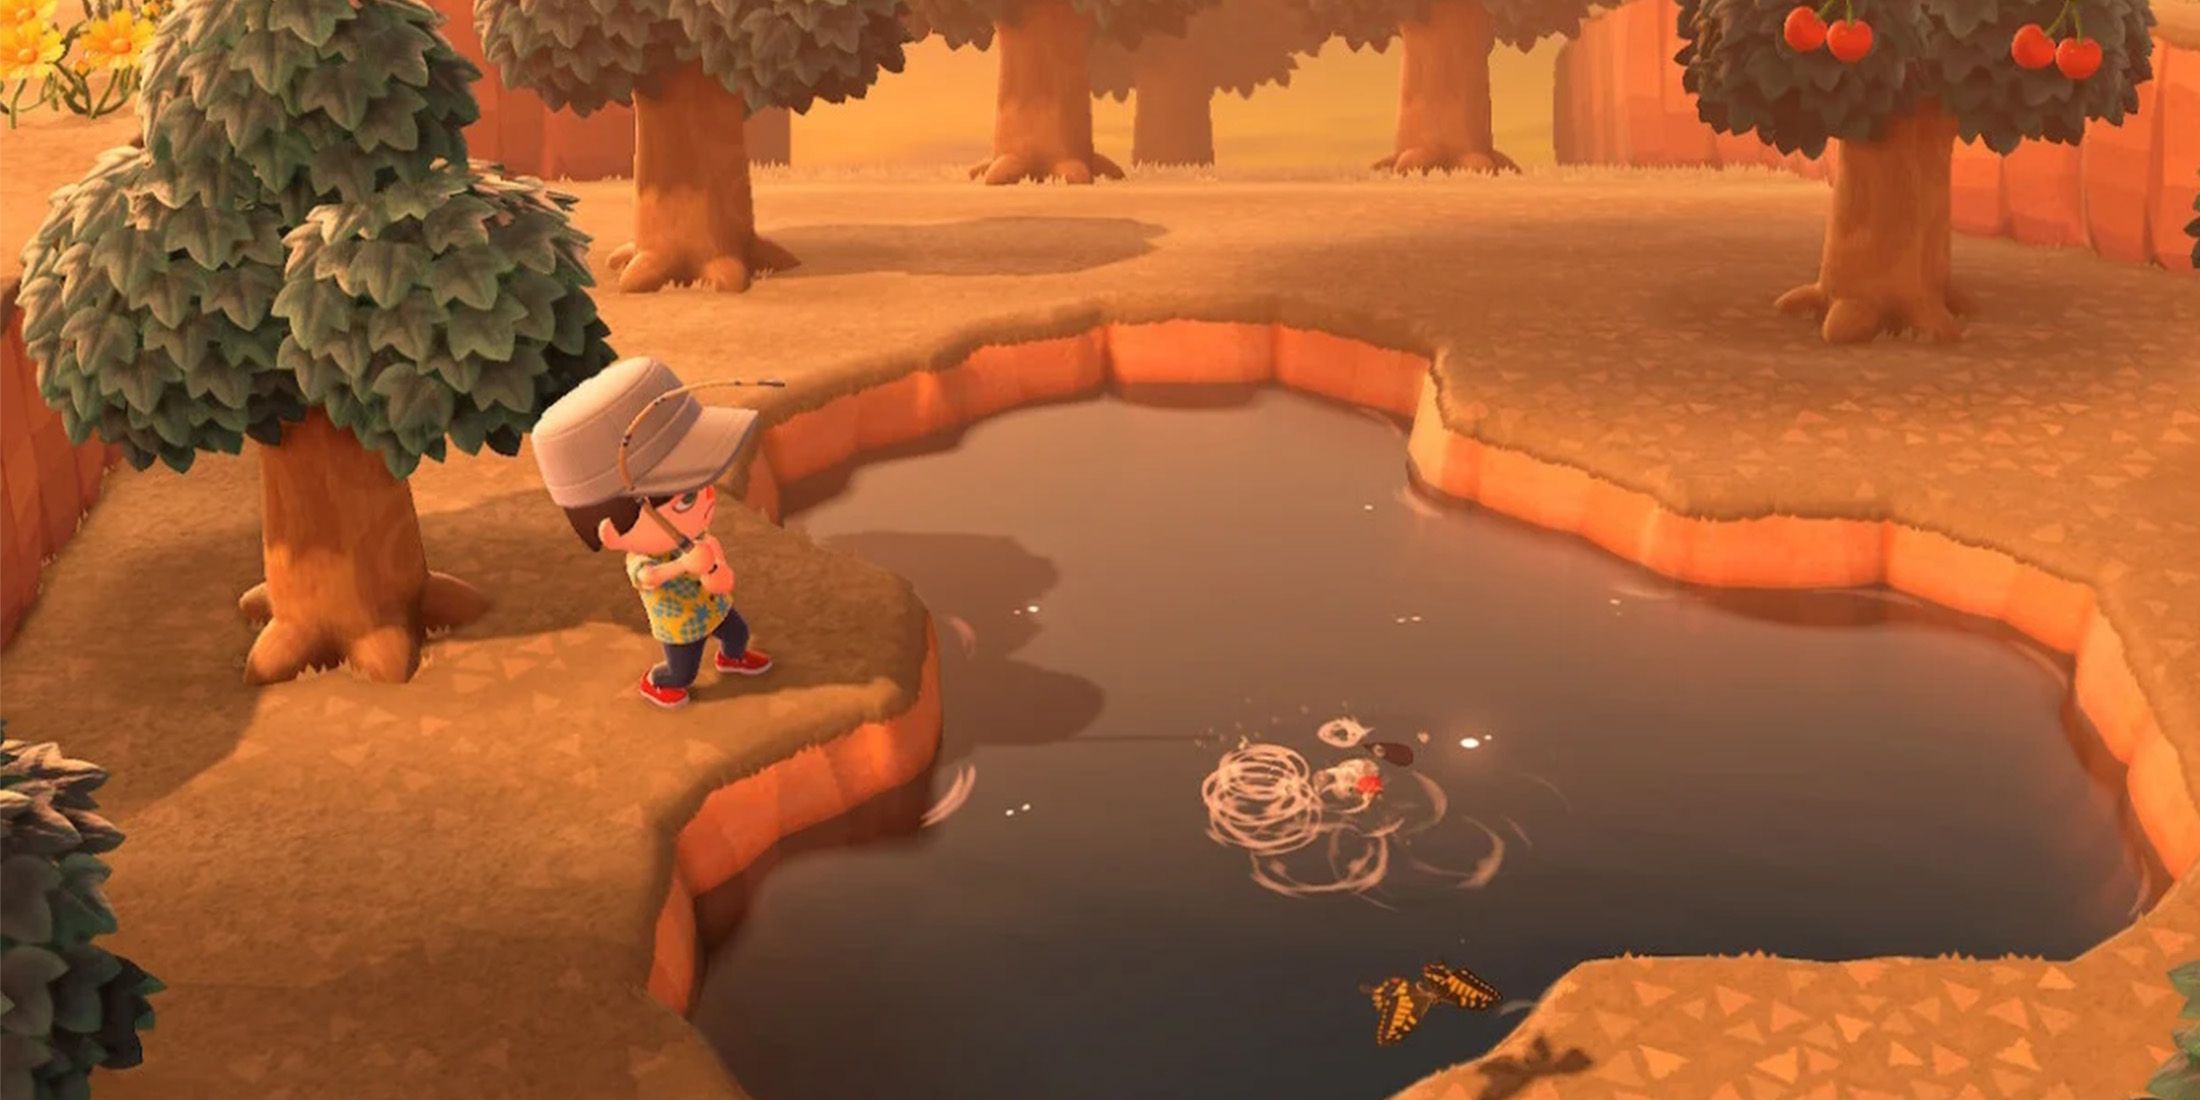 Next, Animal Crossing can change the feel of the series with one change